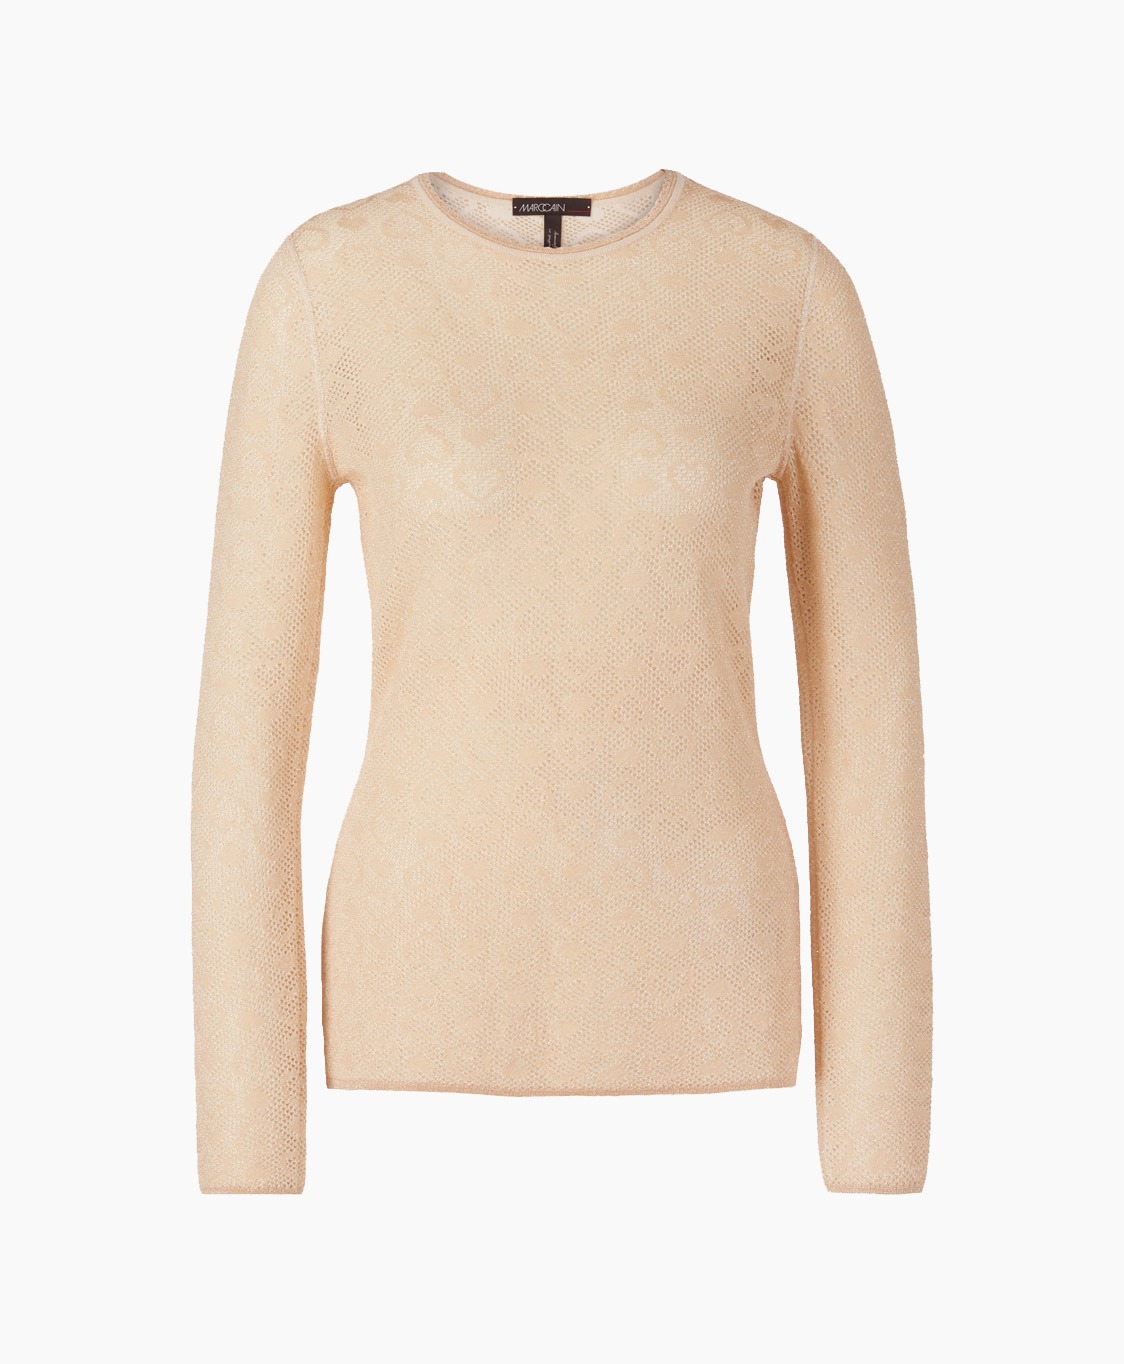 Marccain Collectie Pullover Uc 41.17 M11 Room